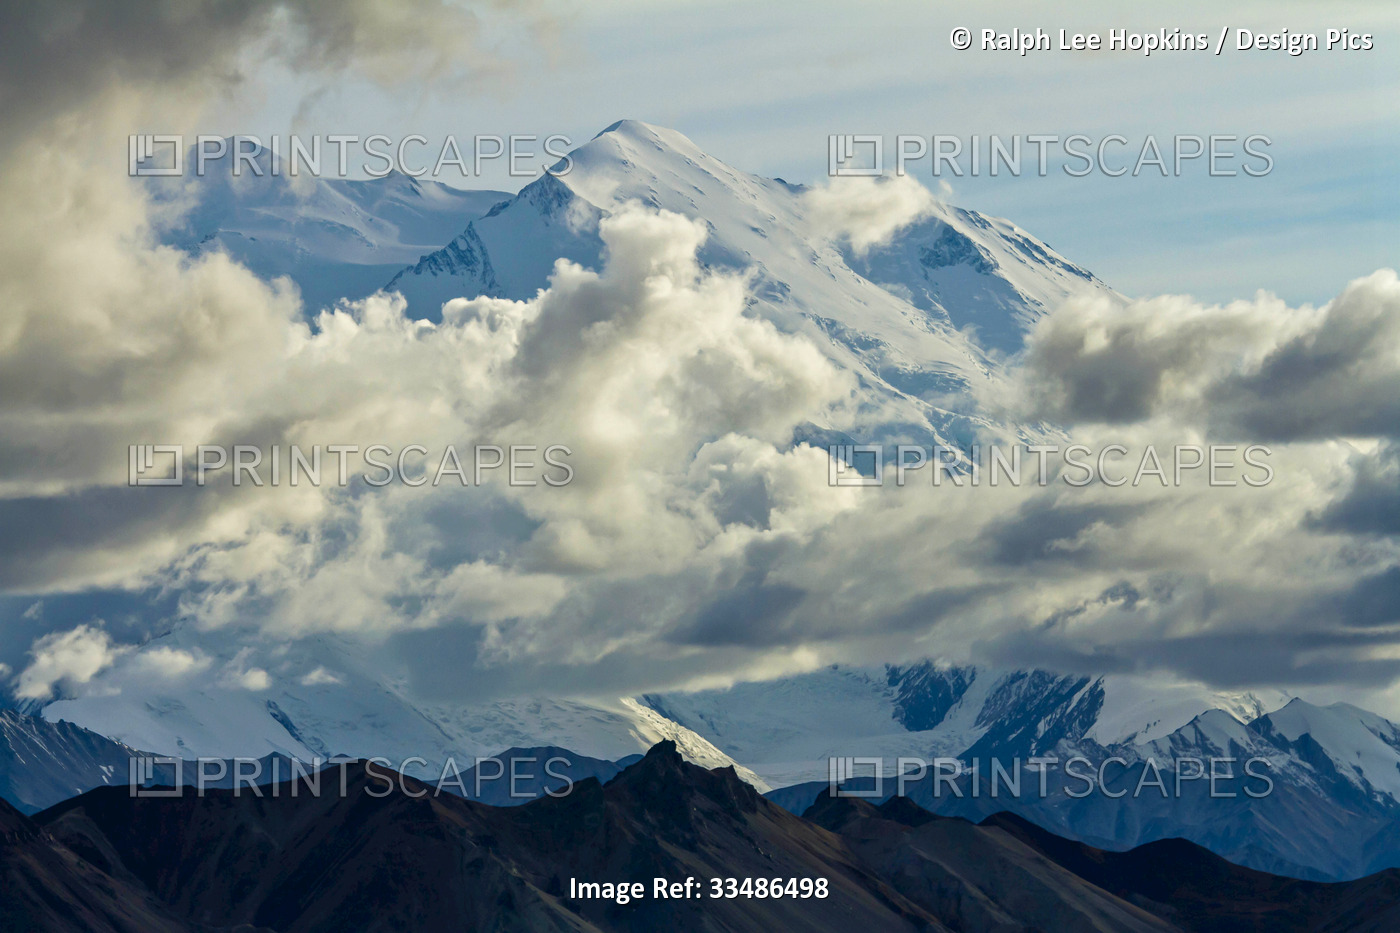 Clouds in front of the Alaska Range mountains.